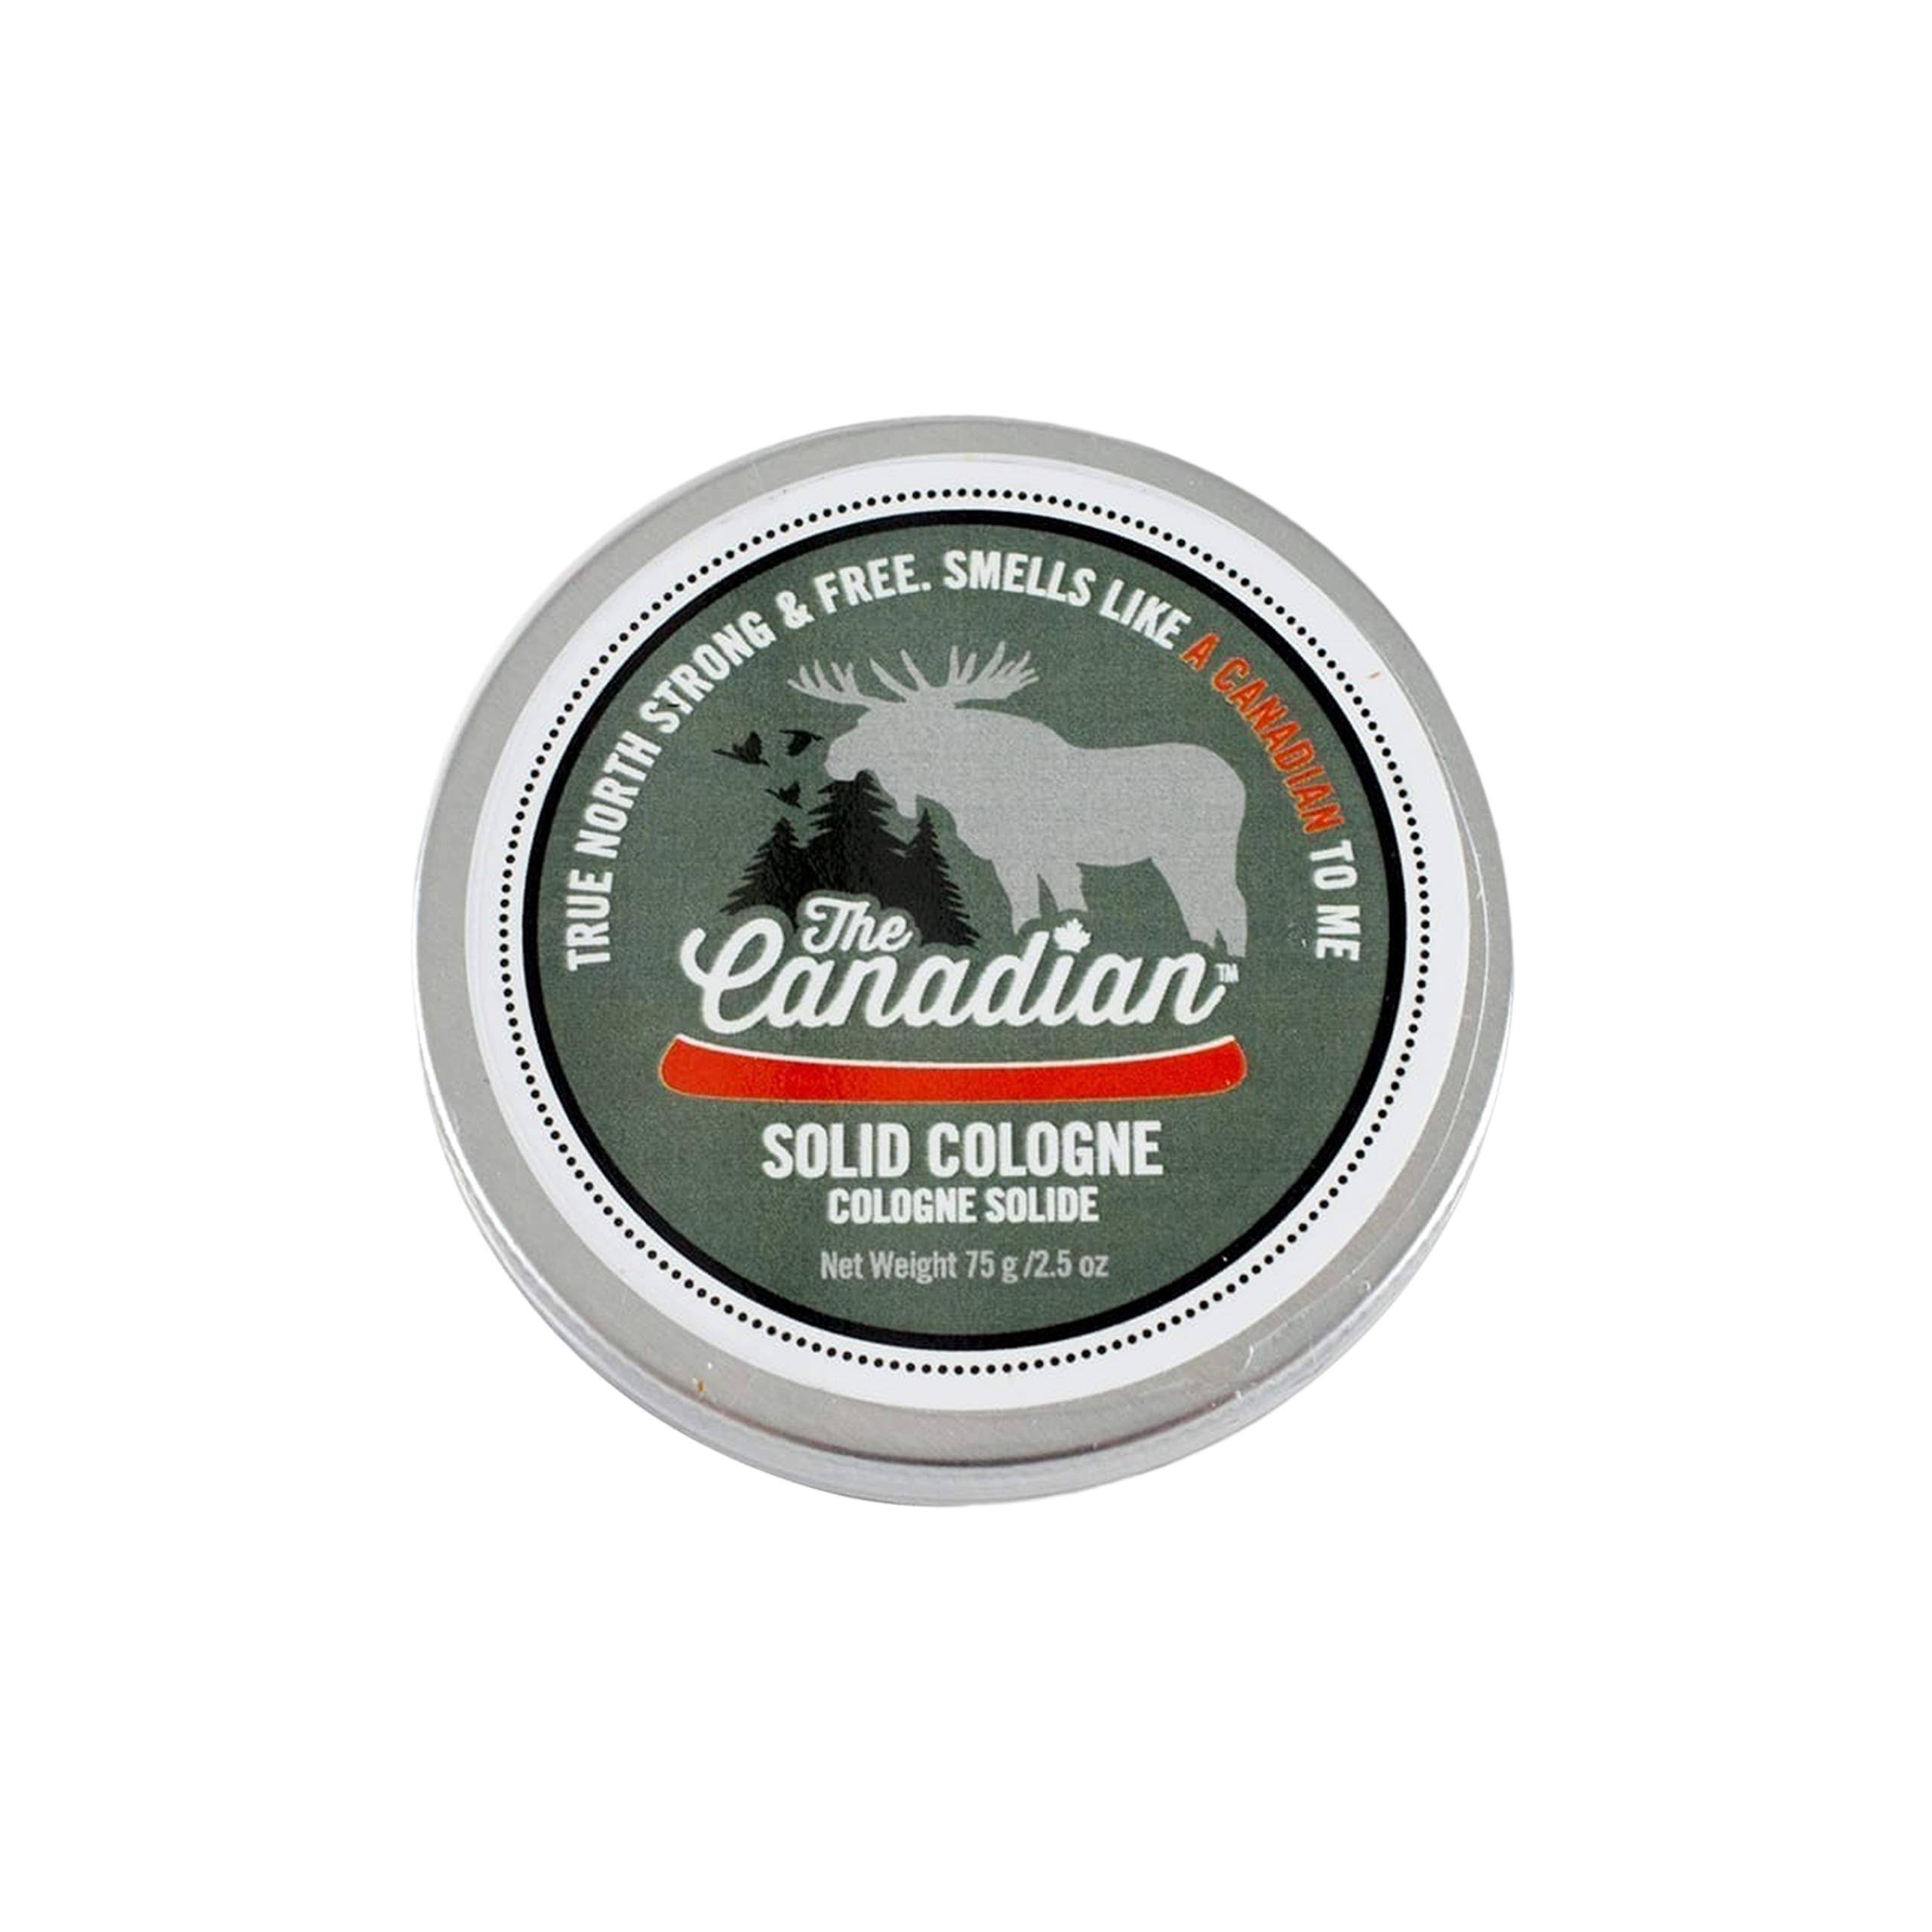 Solid Cologne - The Canadian 2.5 oz